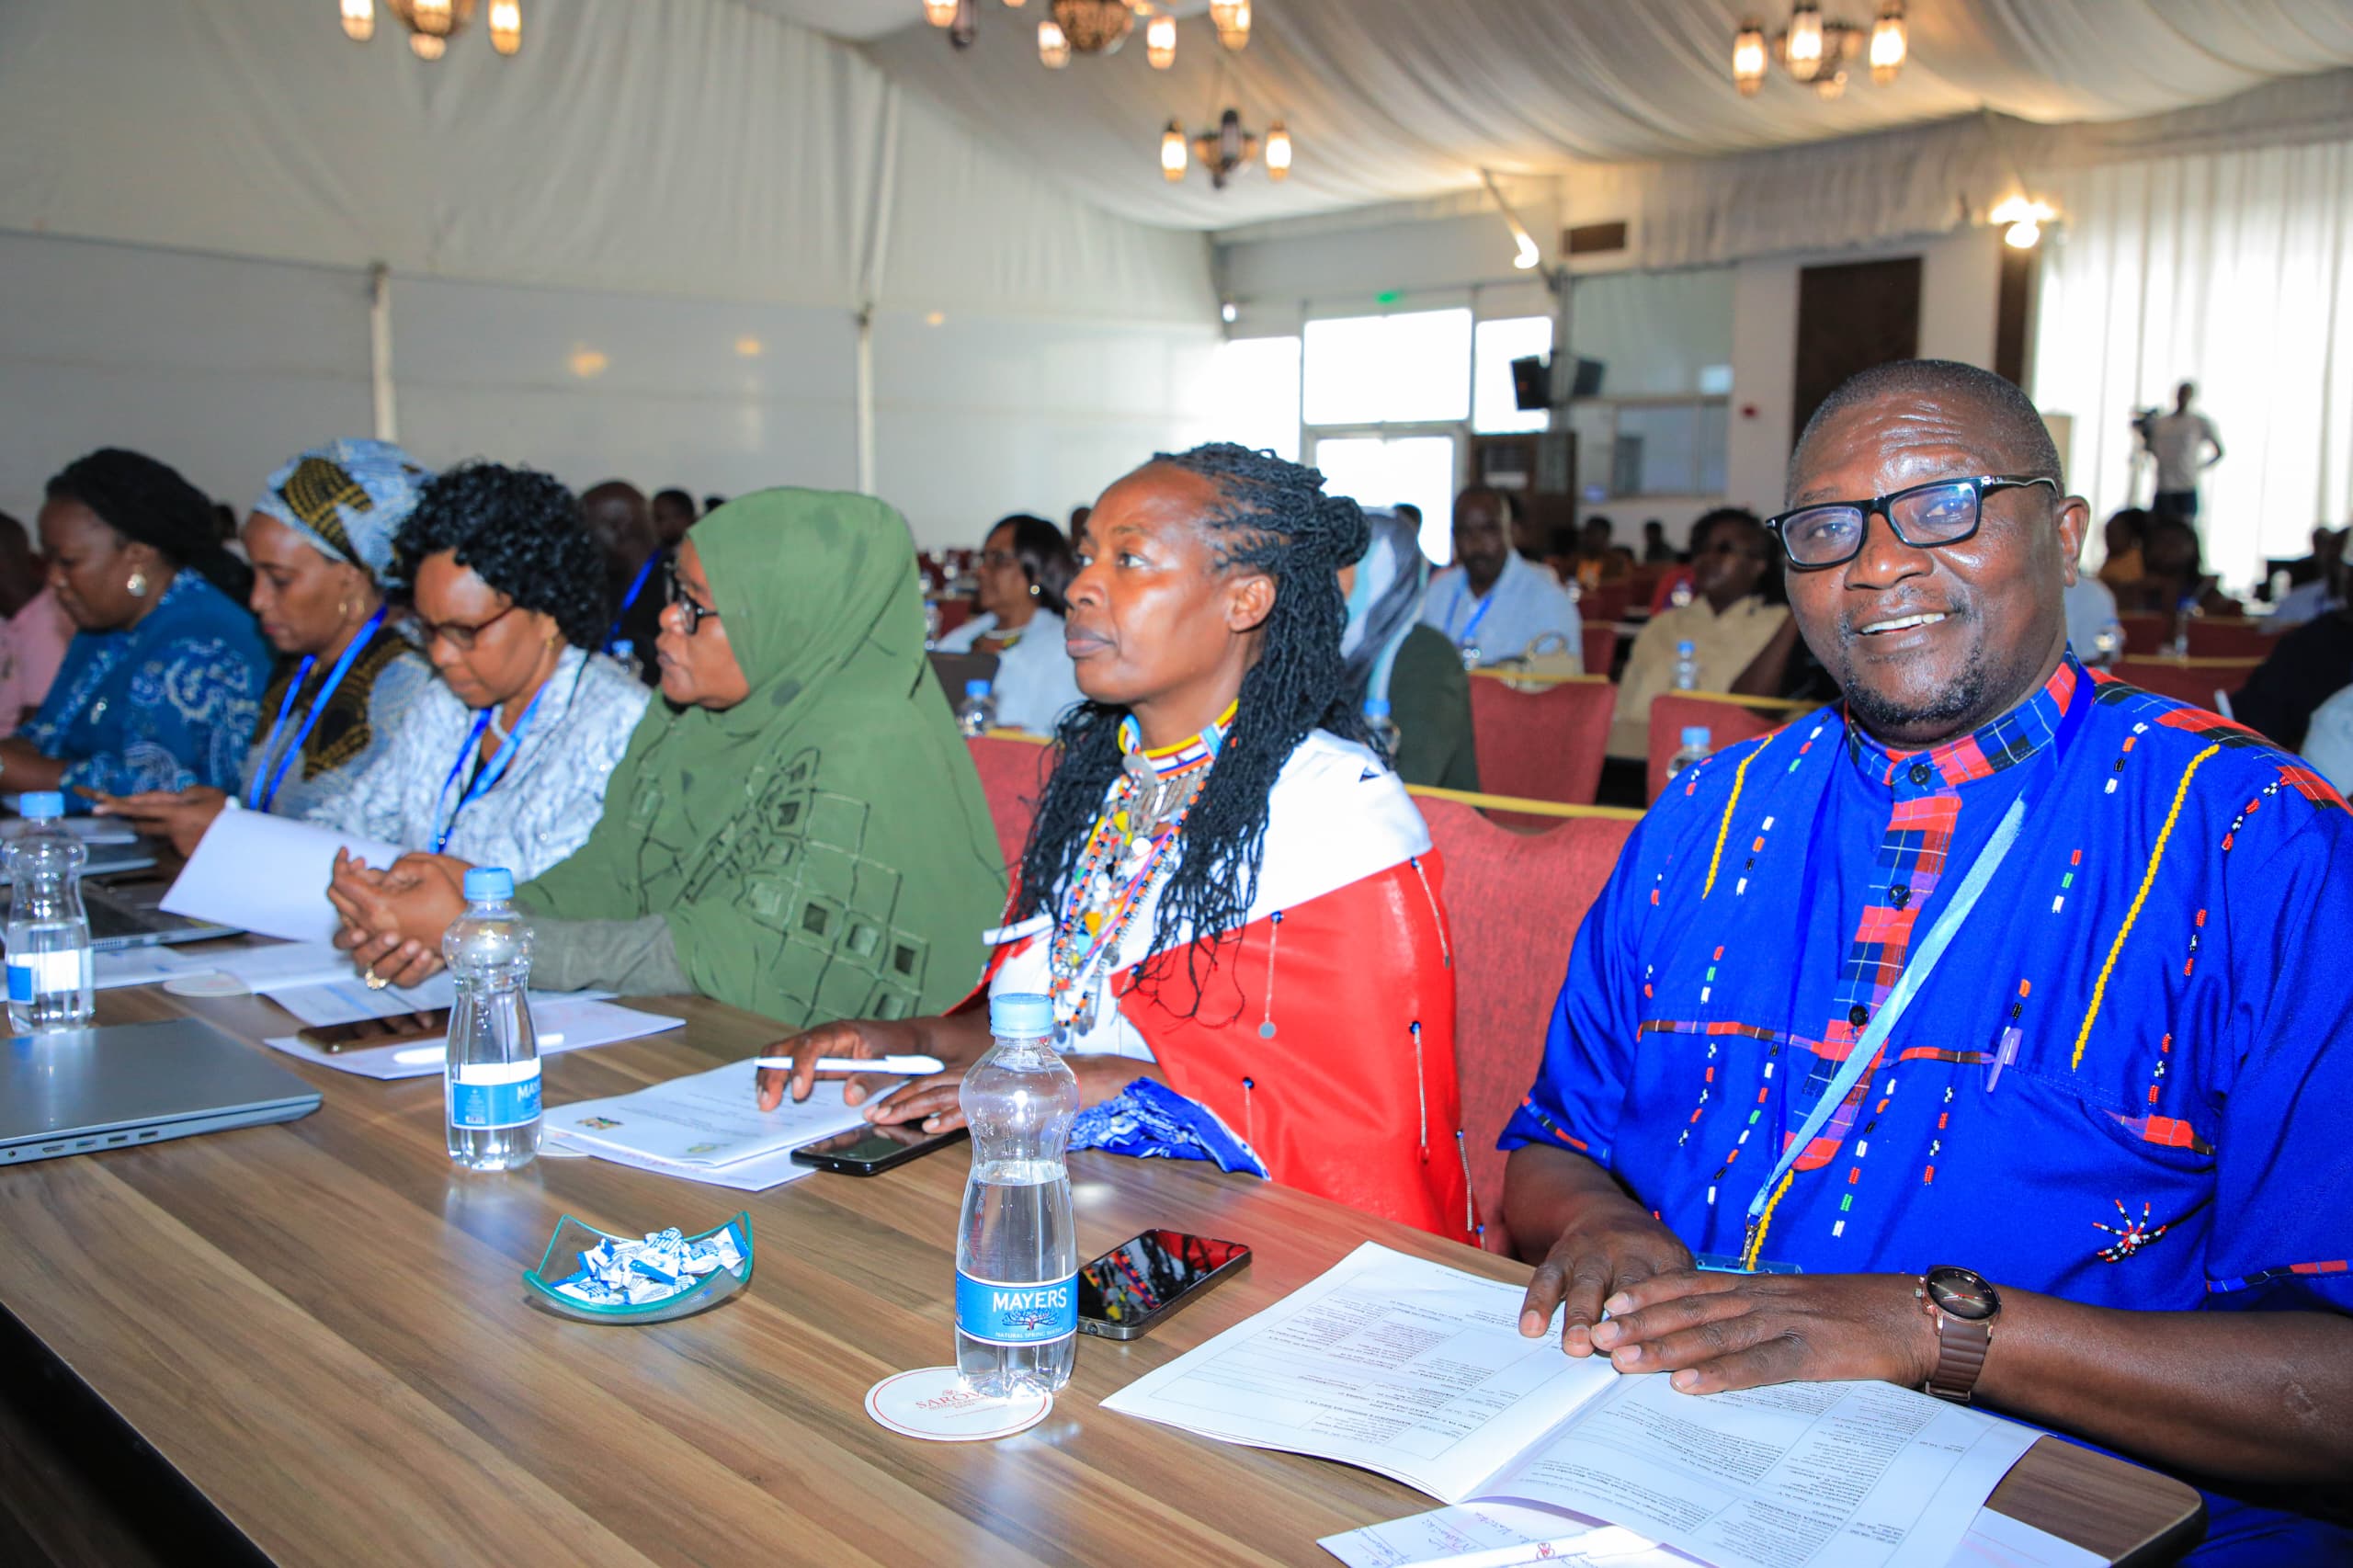 A section of the participants follow proceedings during the opening session of the 2nd East African Kiswahili Commission International Conference in Mombasa.